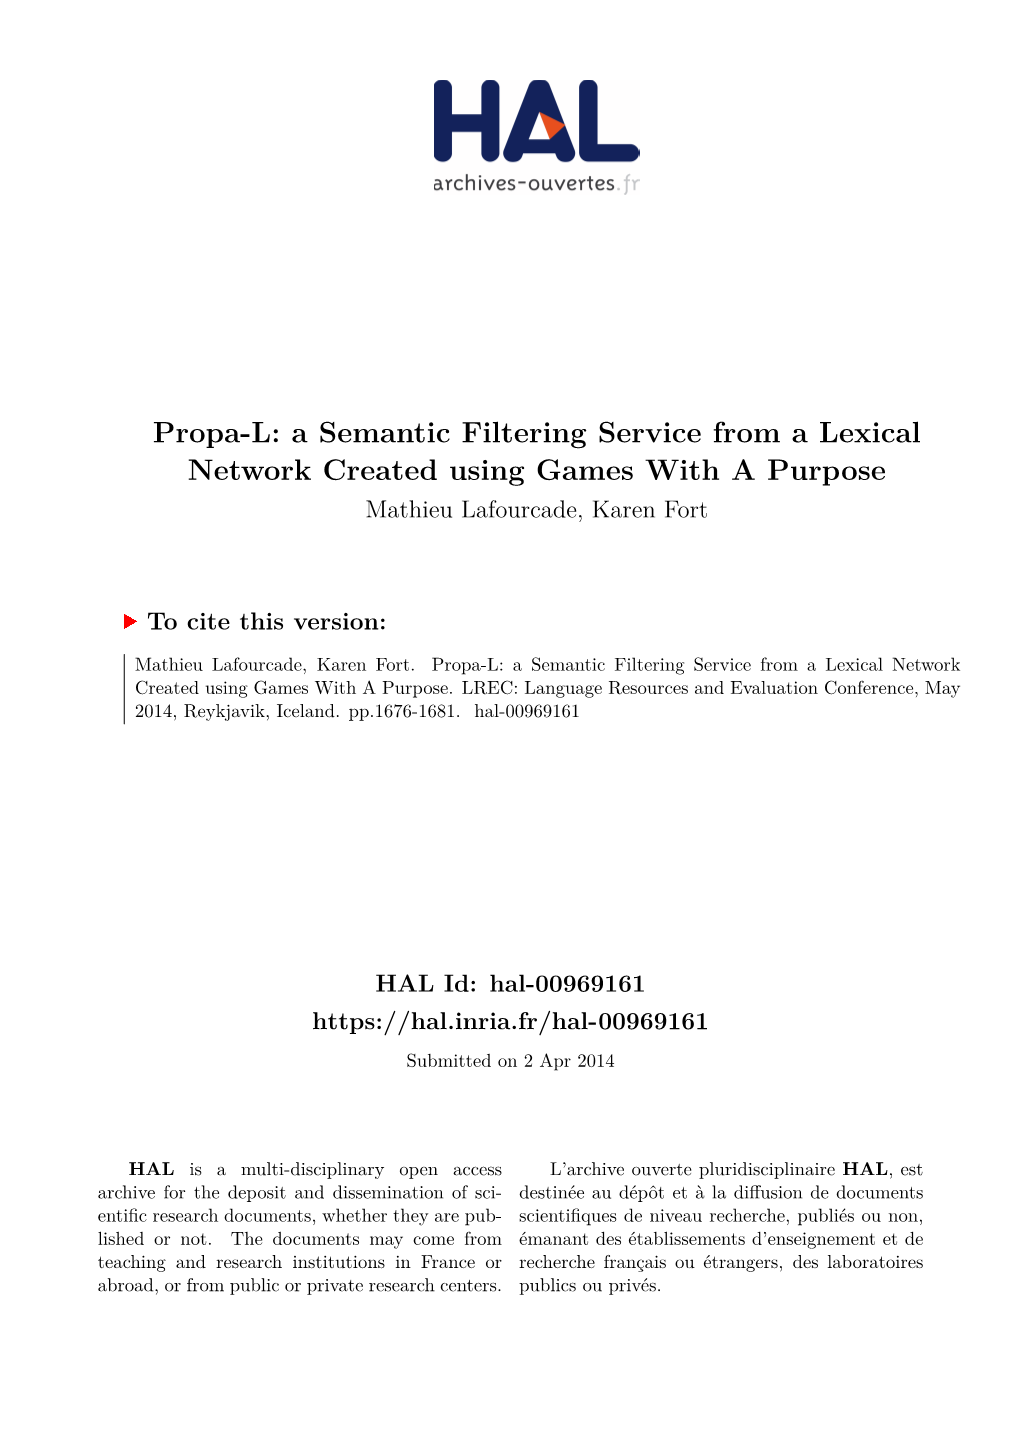 A Semantic Filtering Service from a Lexical Network Created Using Games with a Purpose Mathieu Lafourcade, Karen Fort